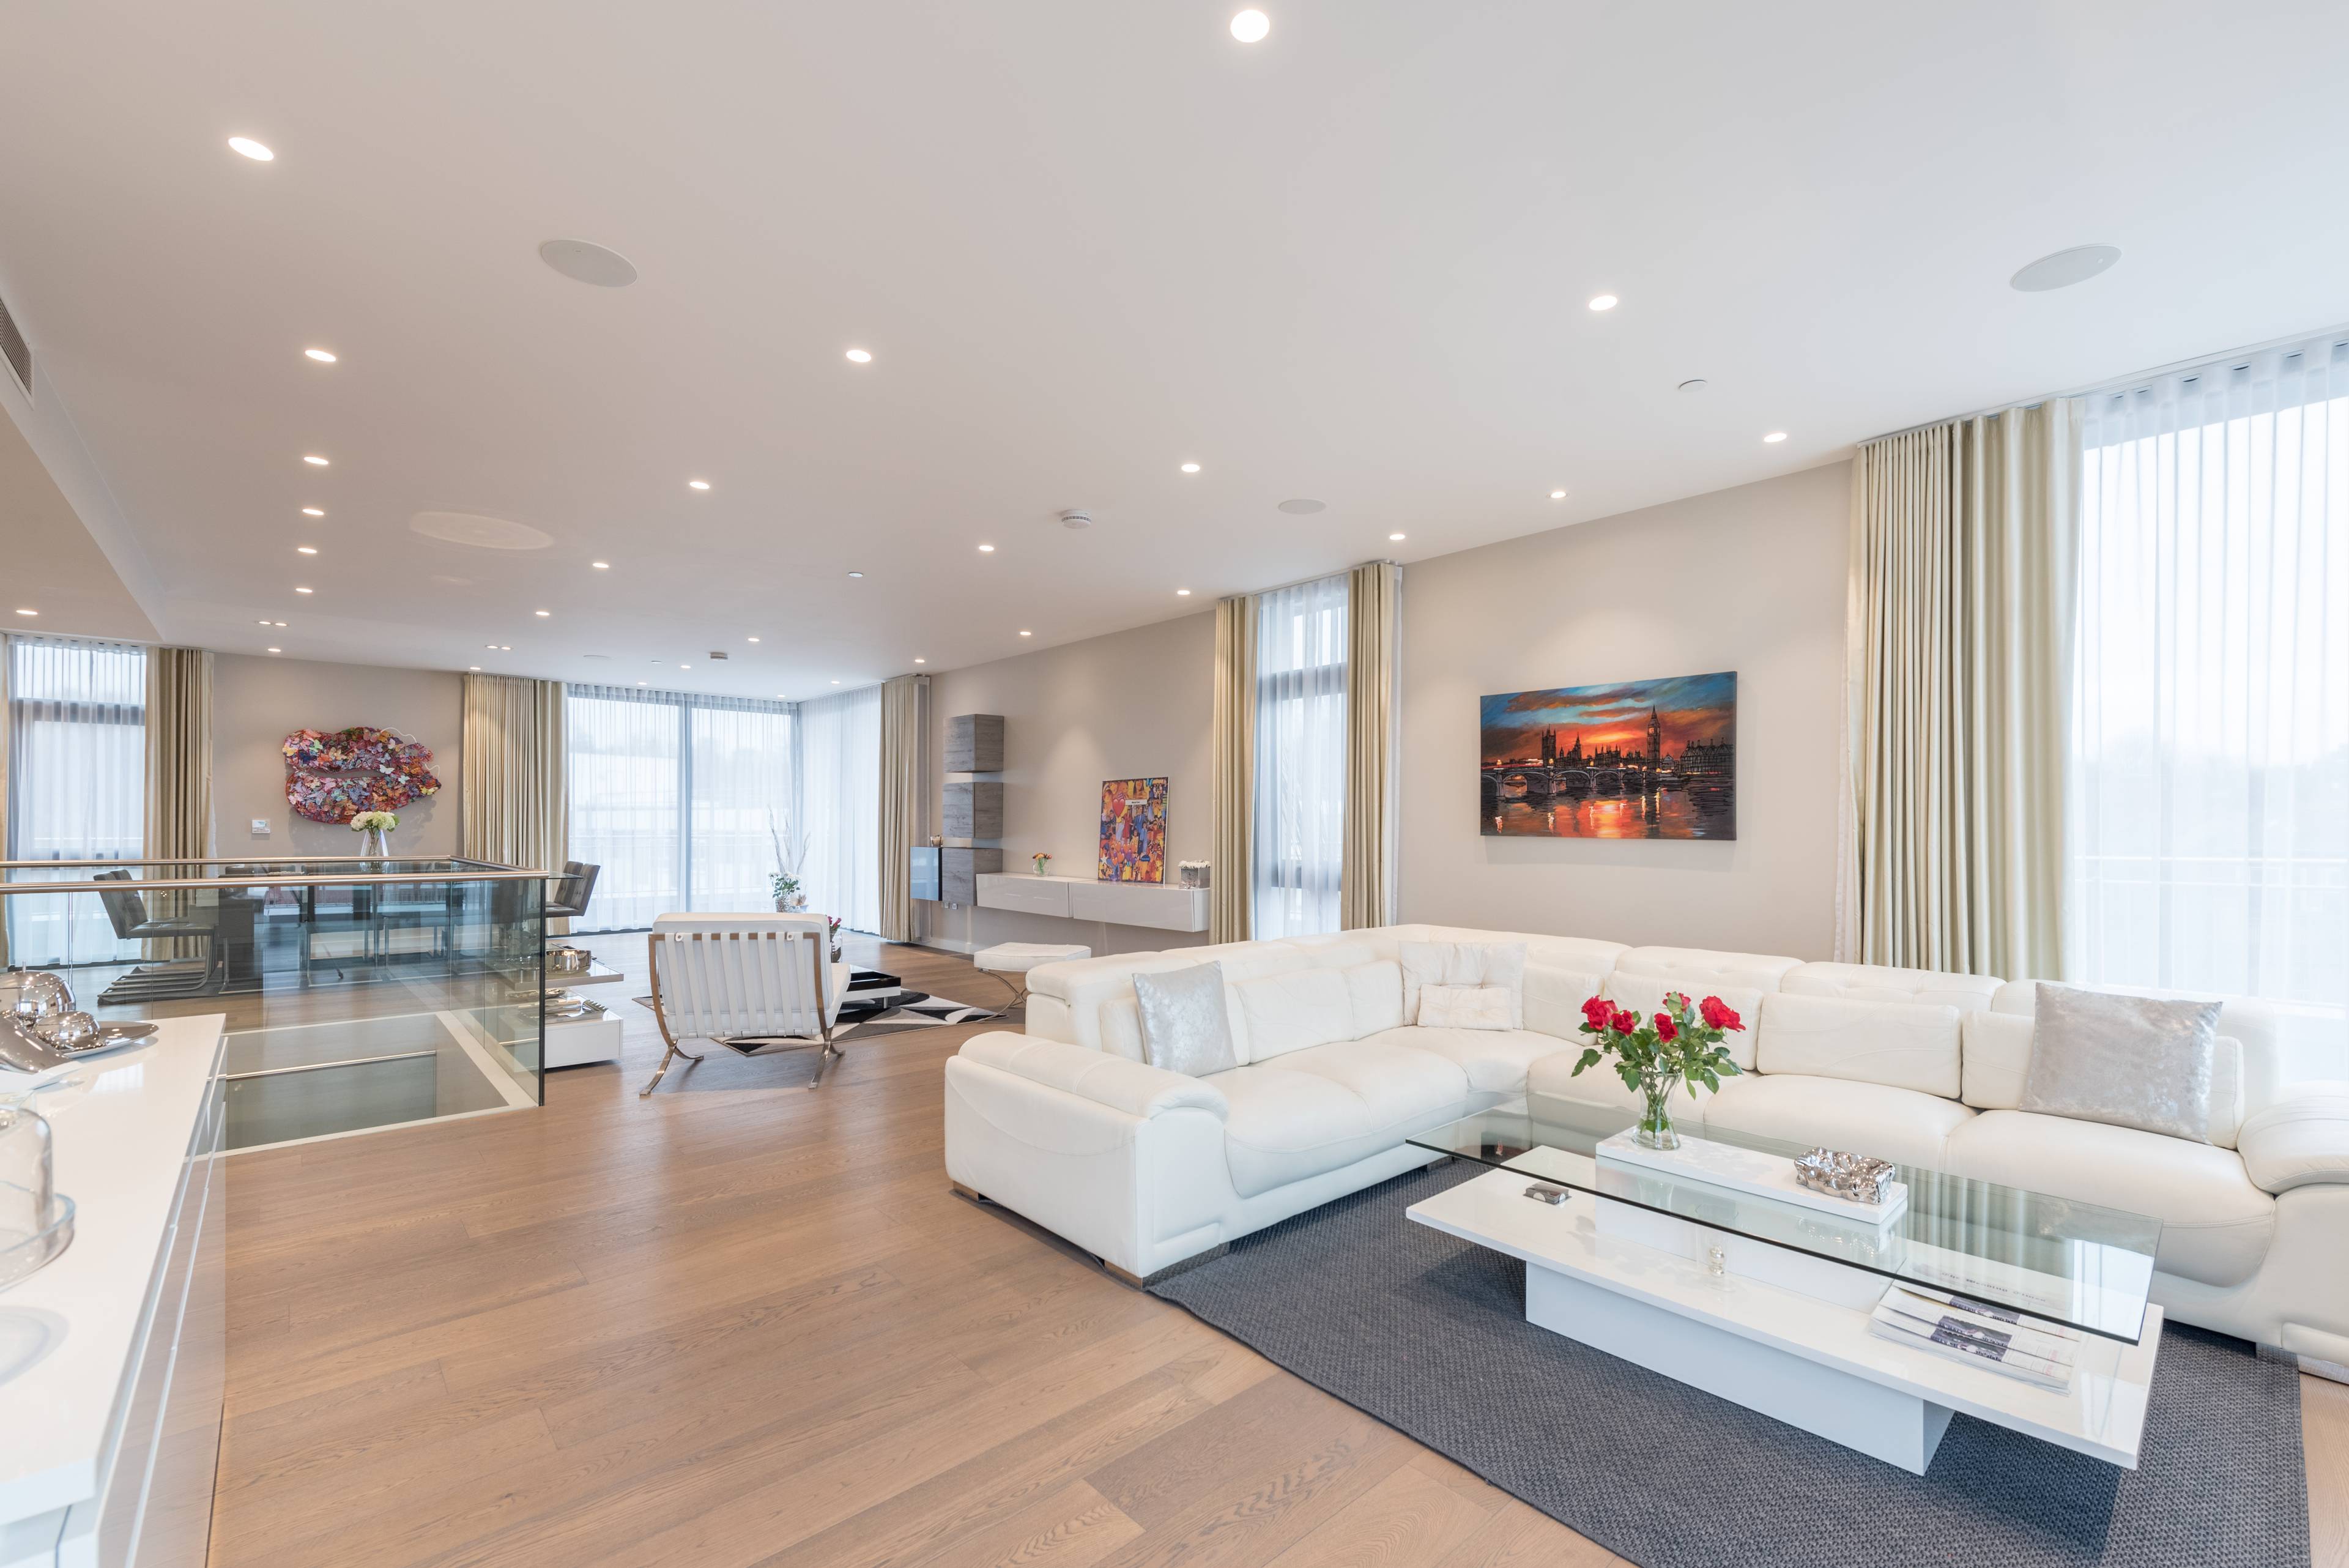 Out of crafted homes in Child's Hill and a boutique development of 9 luxury apartments located in the heart of fashionable North-West London, we bring to you the CROWN JEWEL, the one and only Duplex Penthouse.